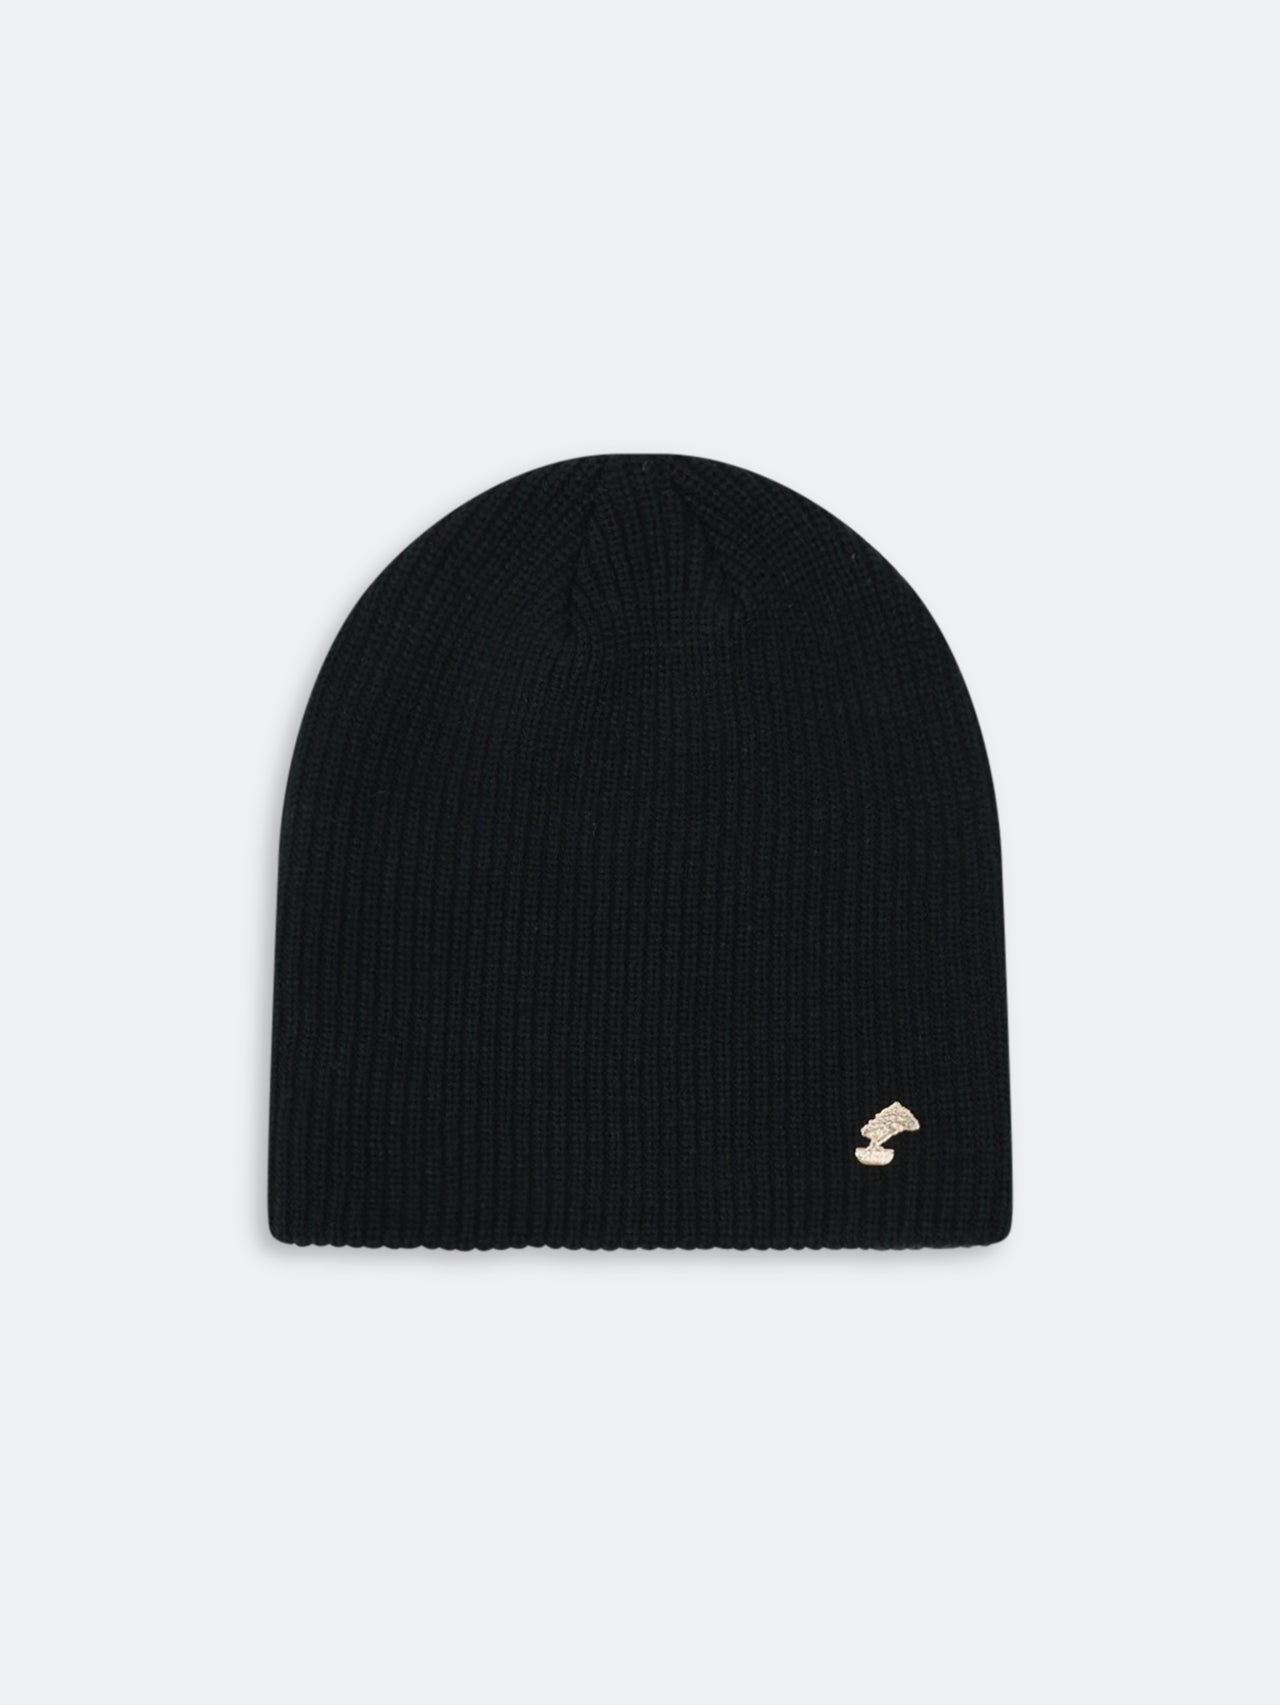 CABLE KNIT BEANIE - BLACK